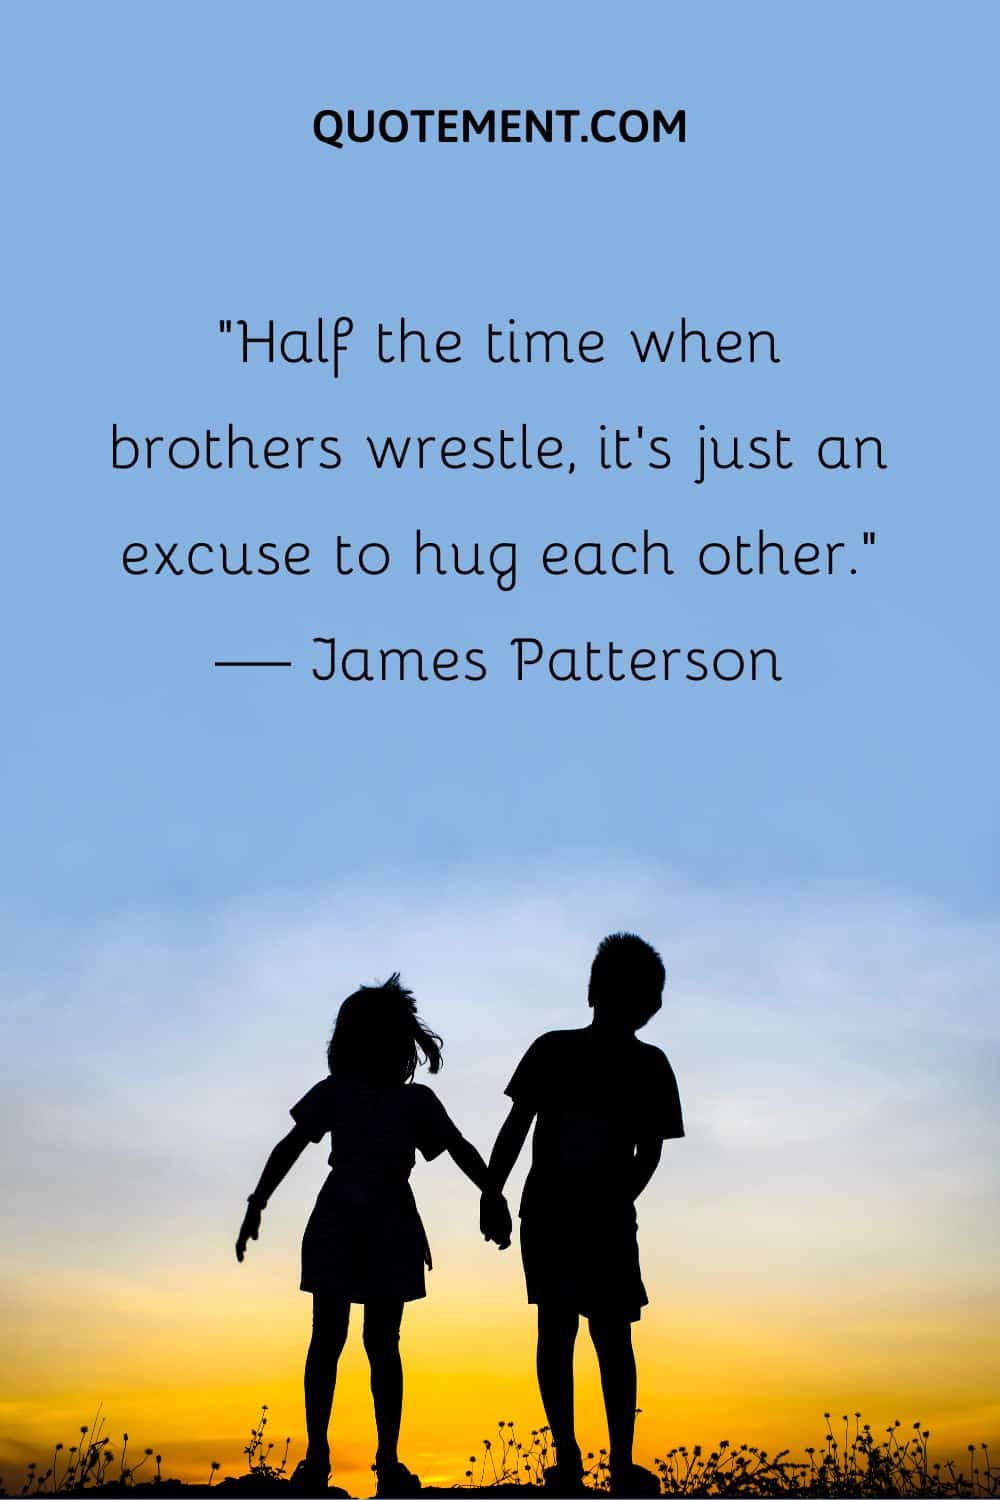 “Half the time when brothers wrestle, it’s just an excuse to hug each other.” — James Patterson